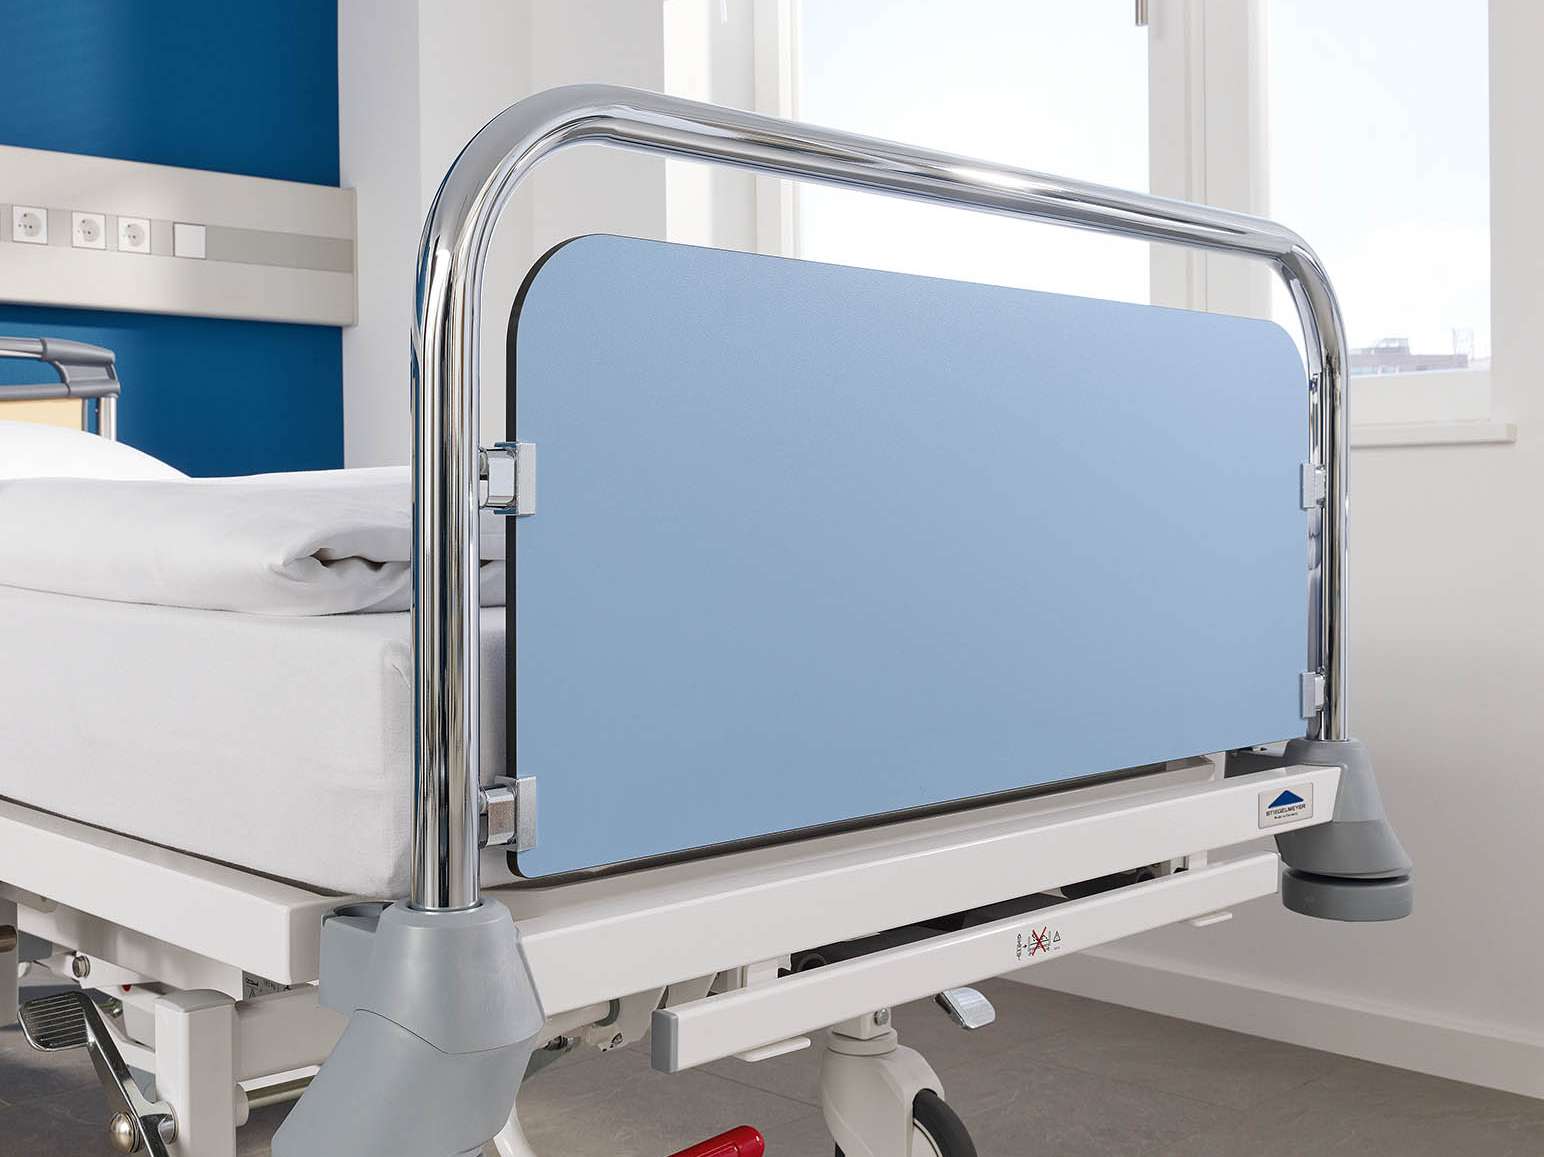 Classic head and footboard of the Deka hospital bed